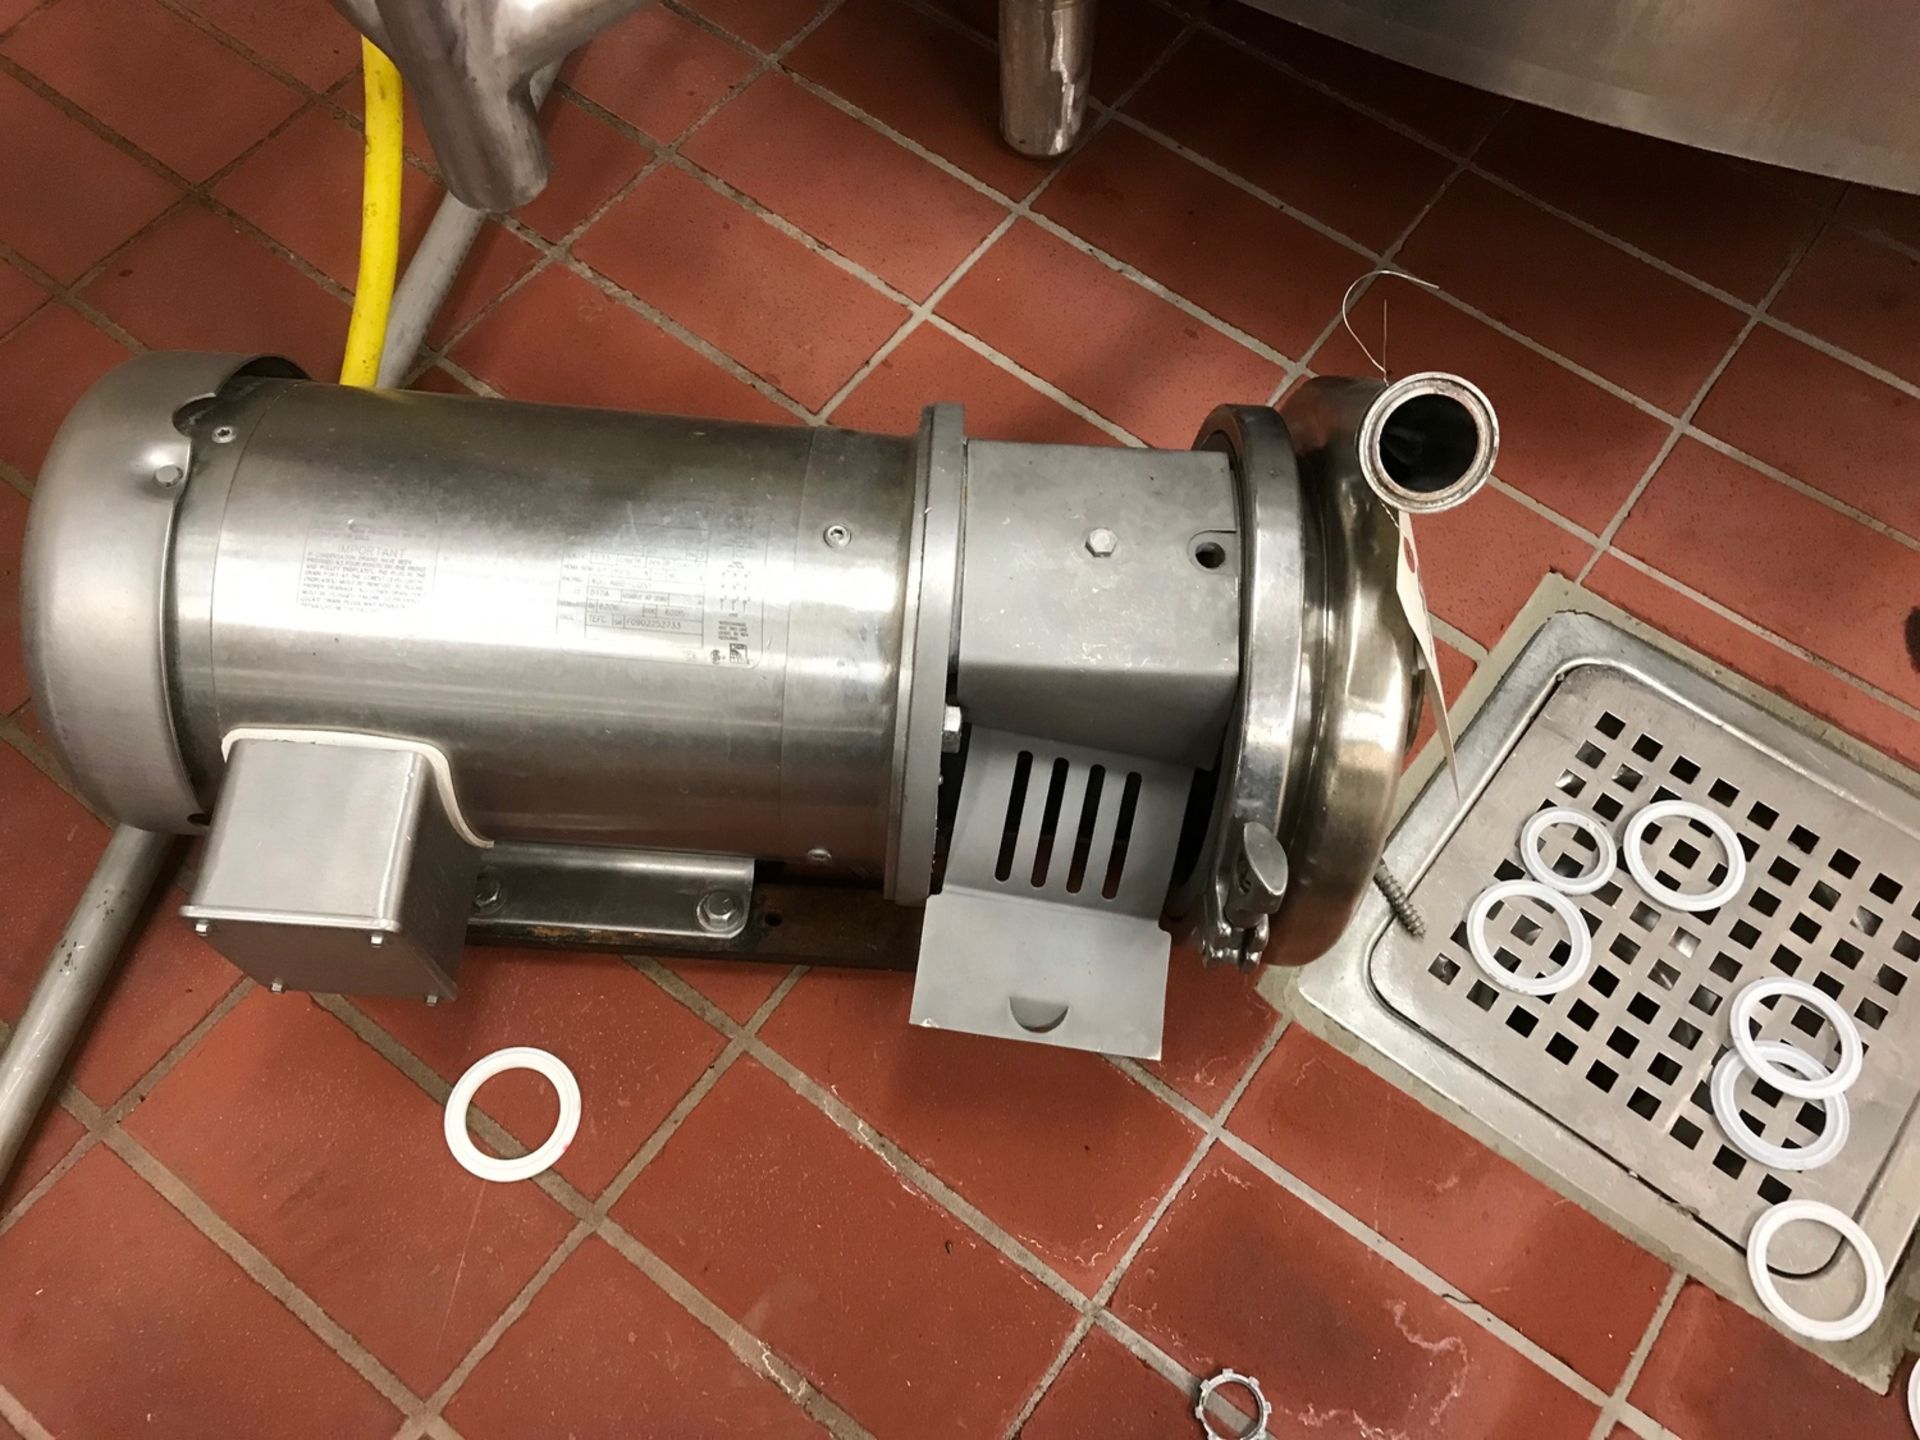 Stainless Steel Centrifugal Pump with Stainless Steel Motor, 2" inlet, 1.5" outlet - Image 2 of 3